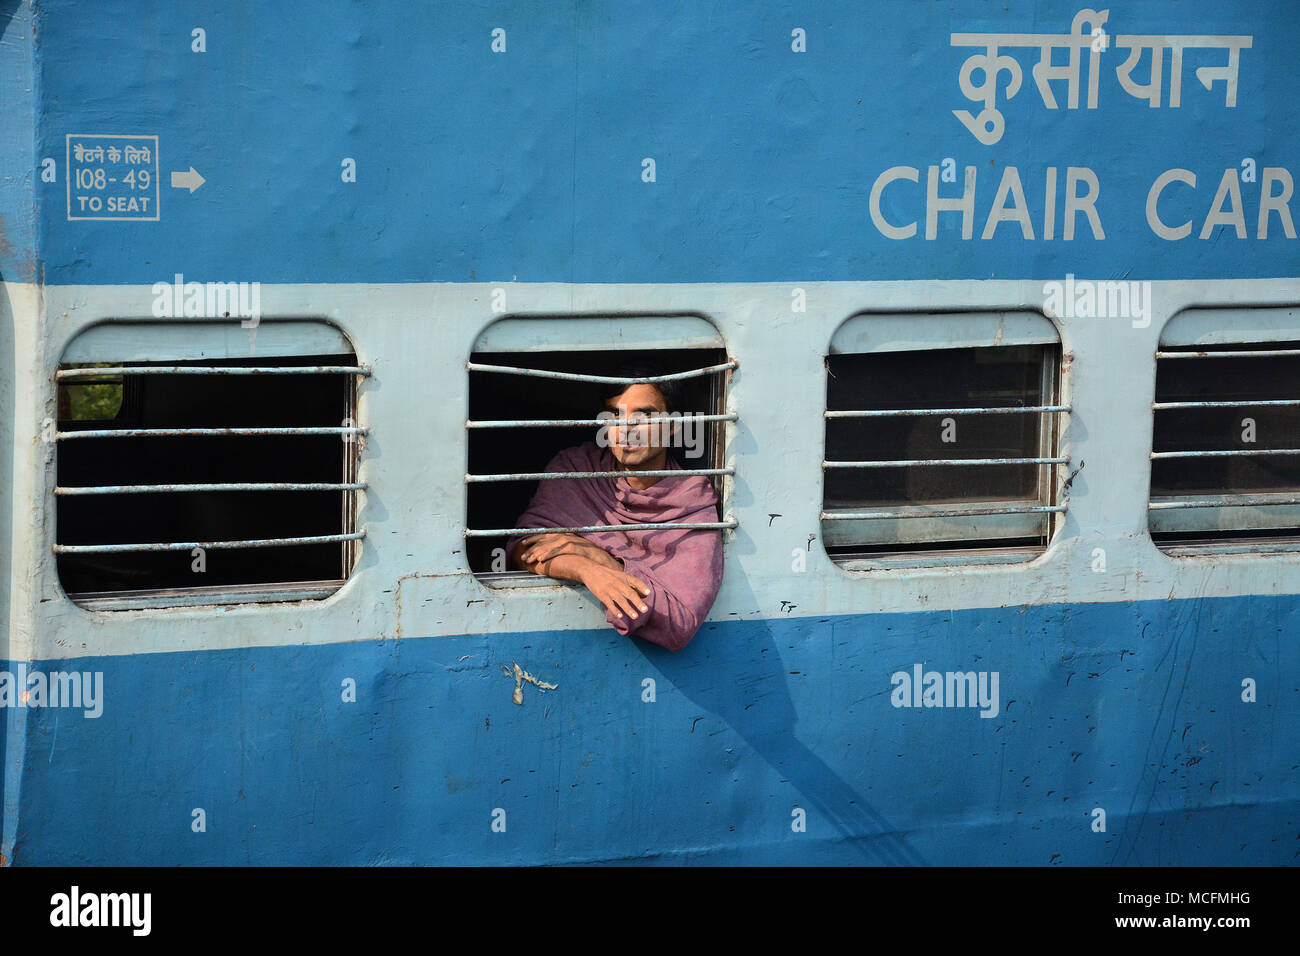 Man looking out of the window on a passing train in India Stock Photo